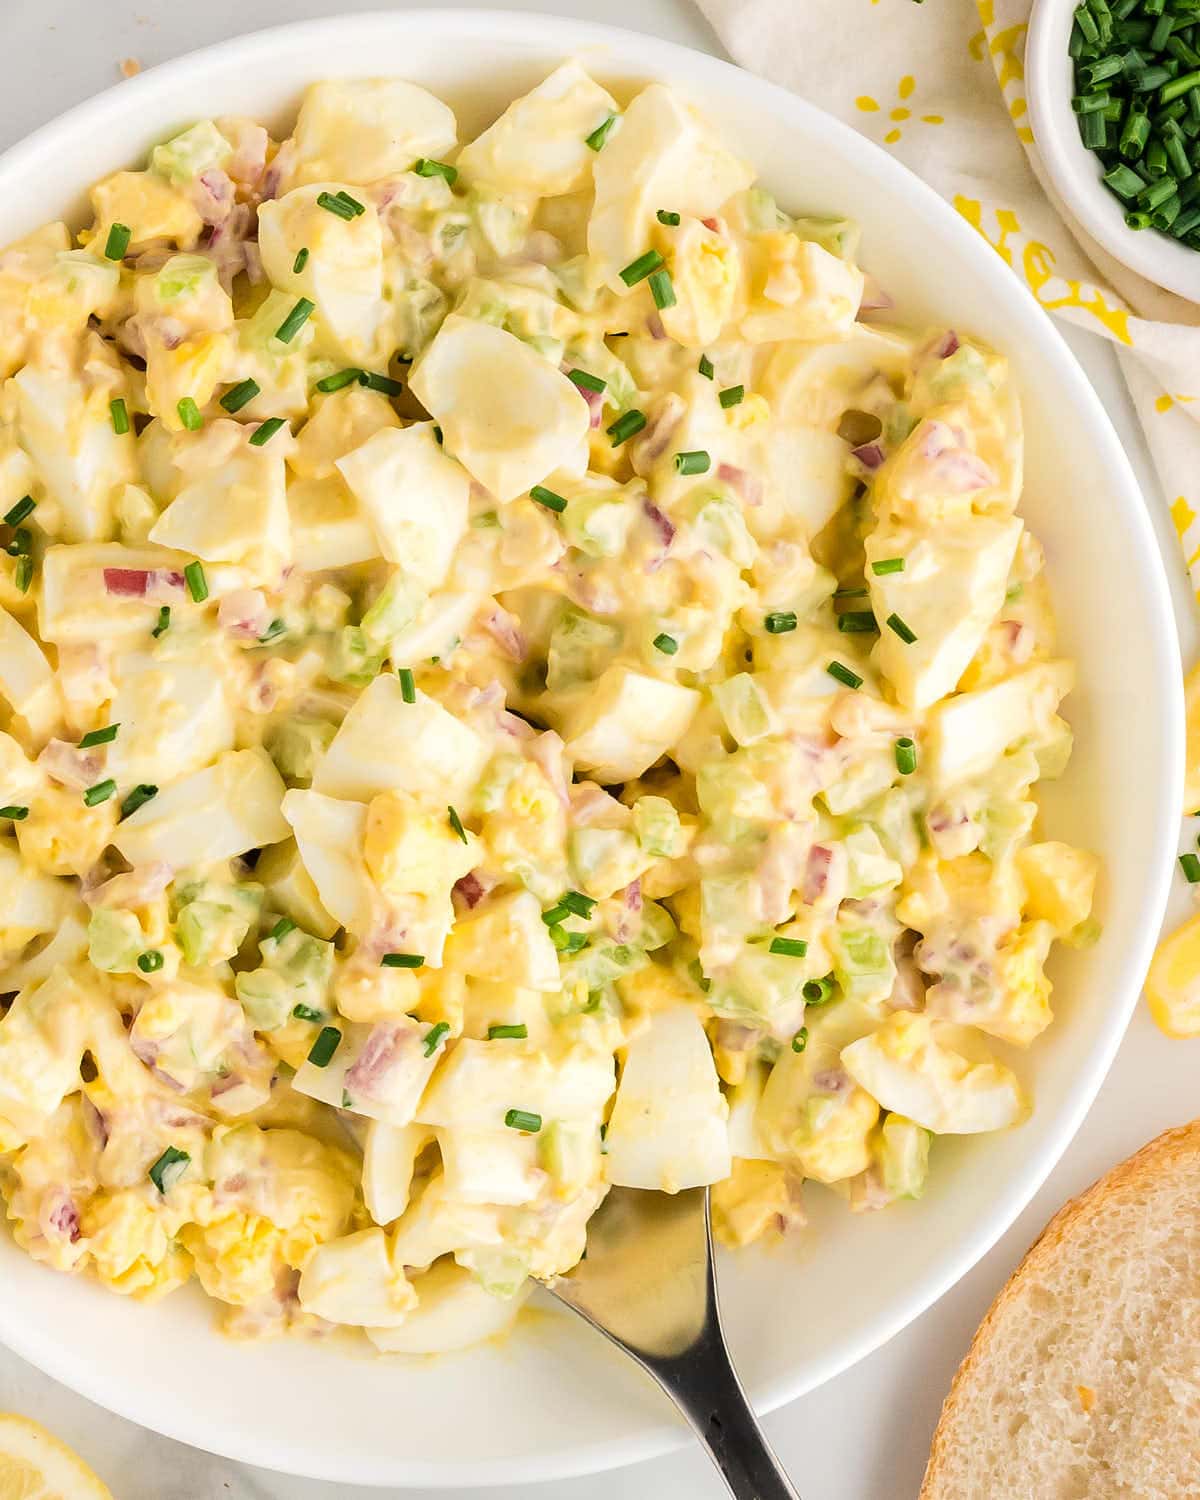 Egg salad served in a large white bowl.